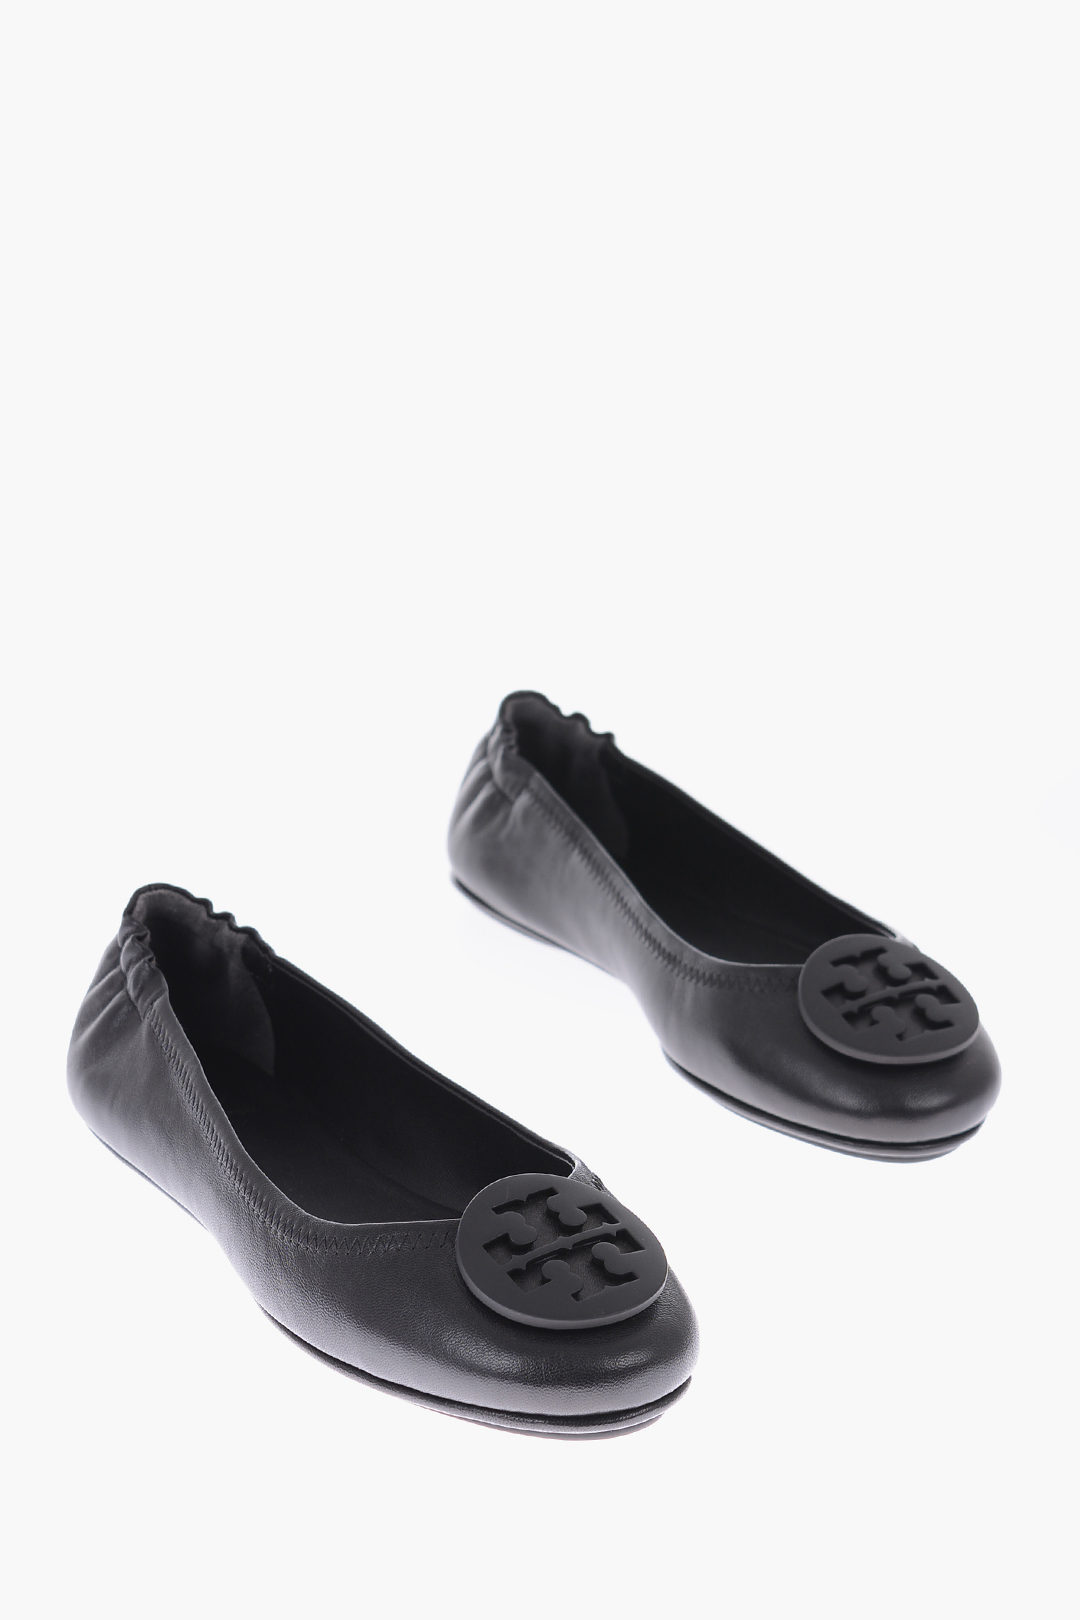 Tory Burch leather Ballet flats women - Glamood Outlet